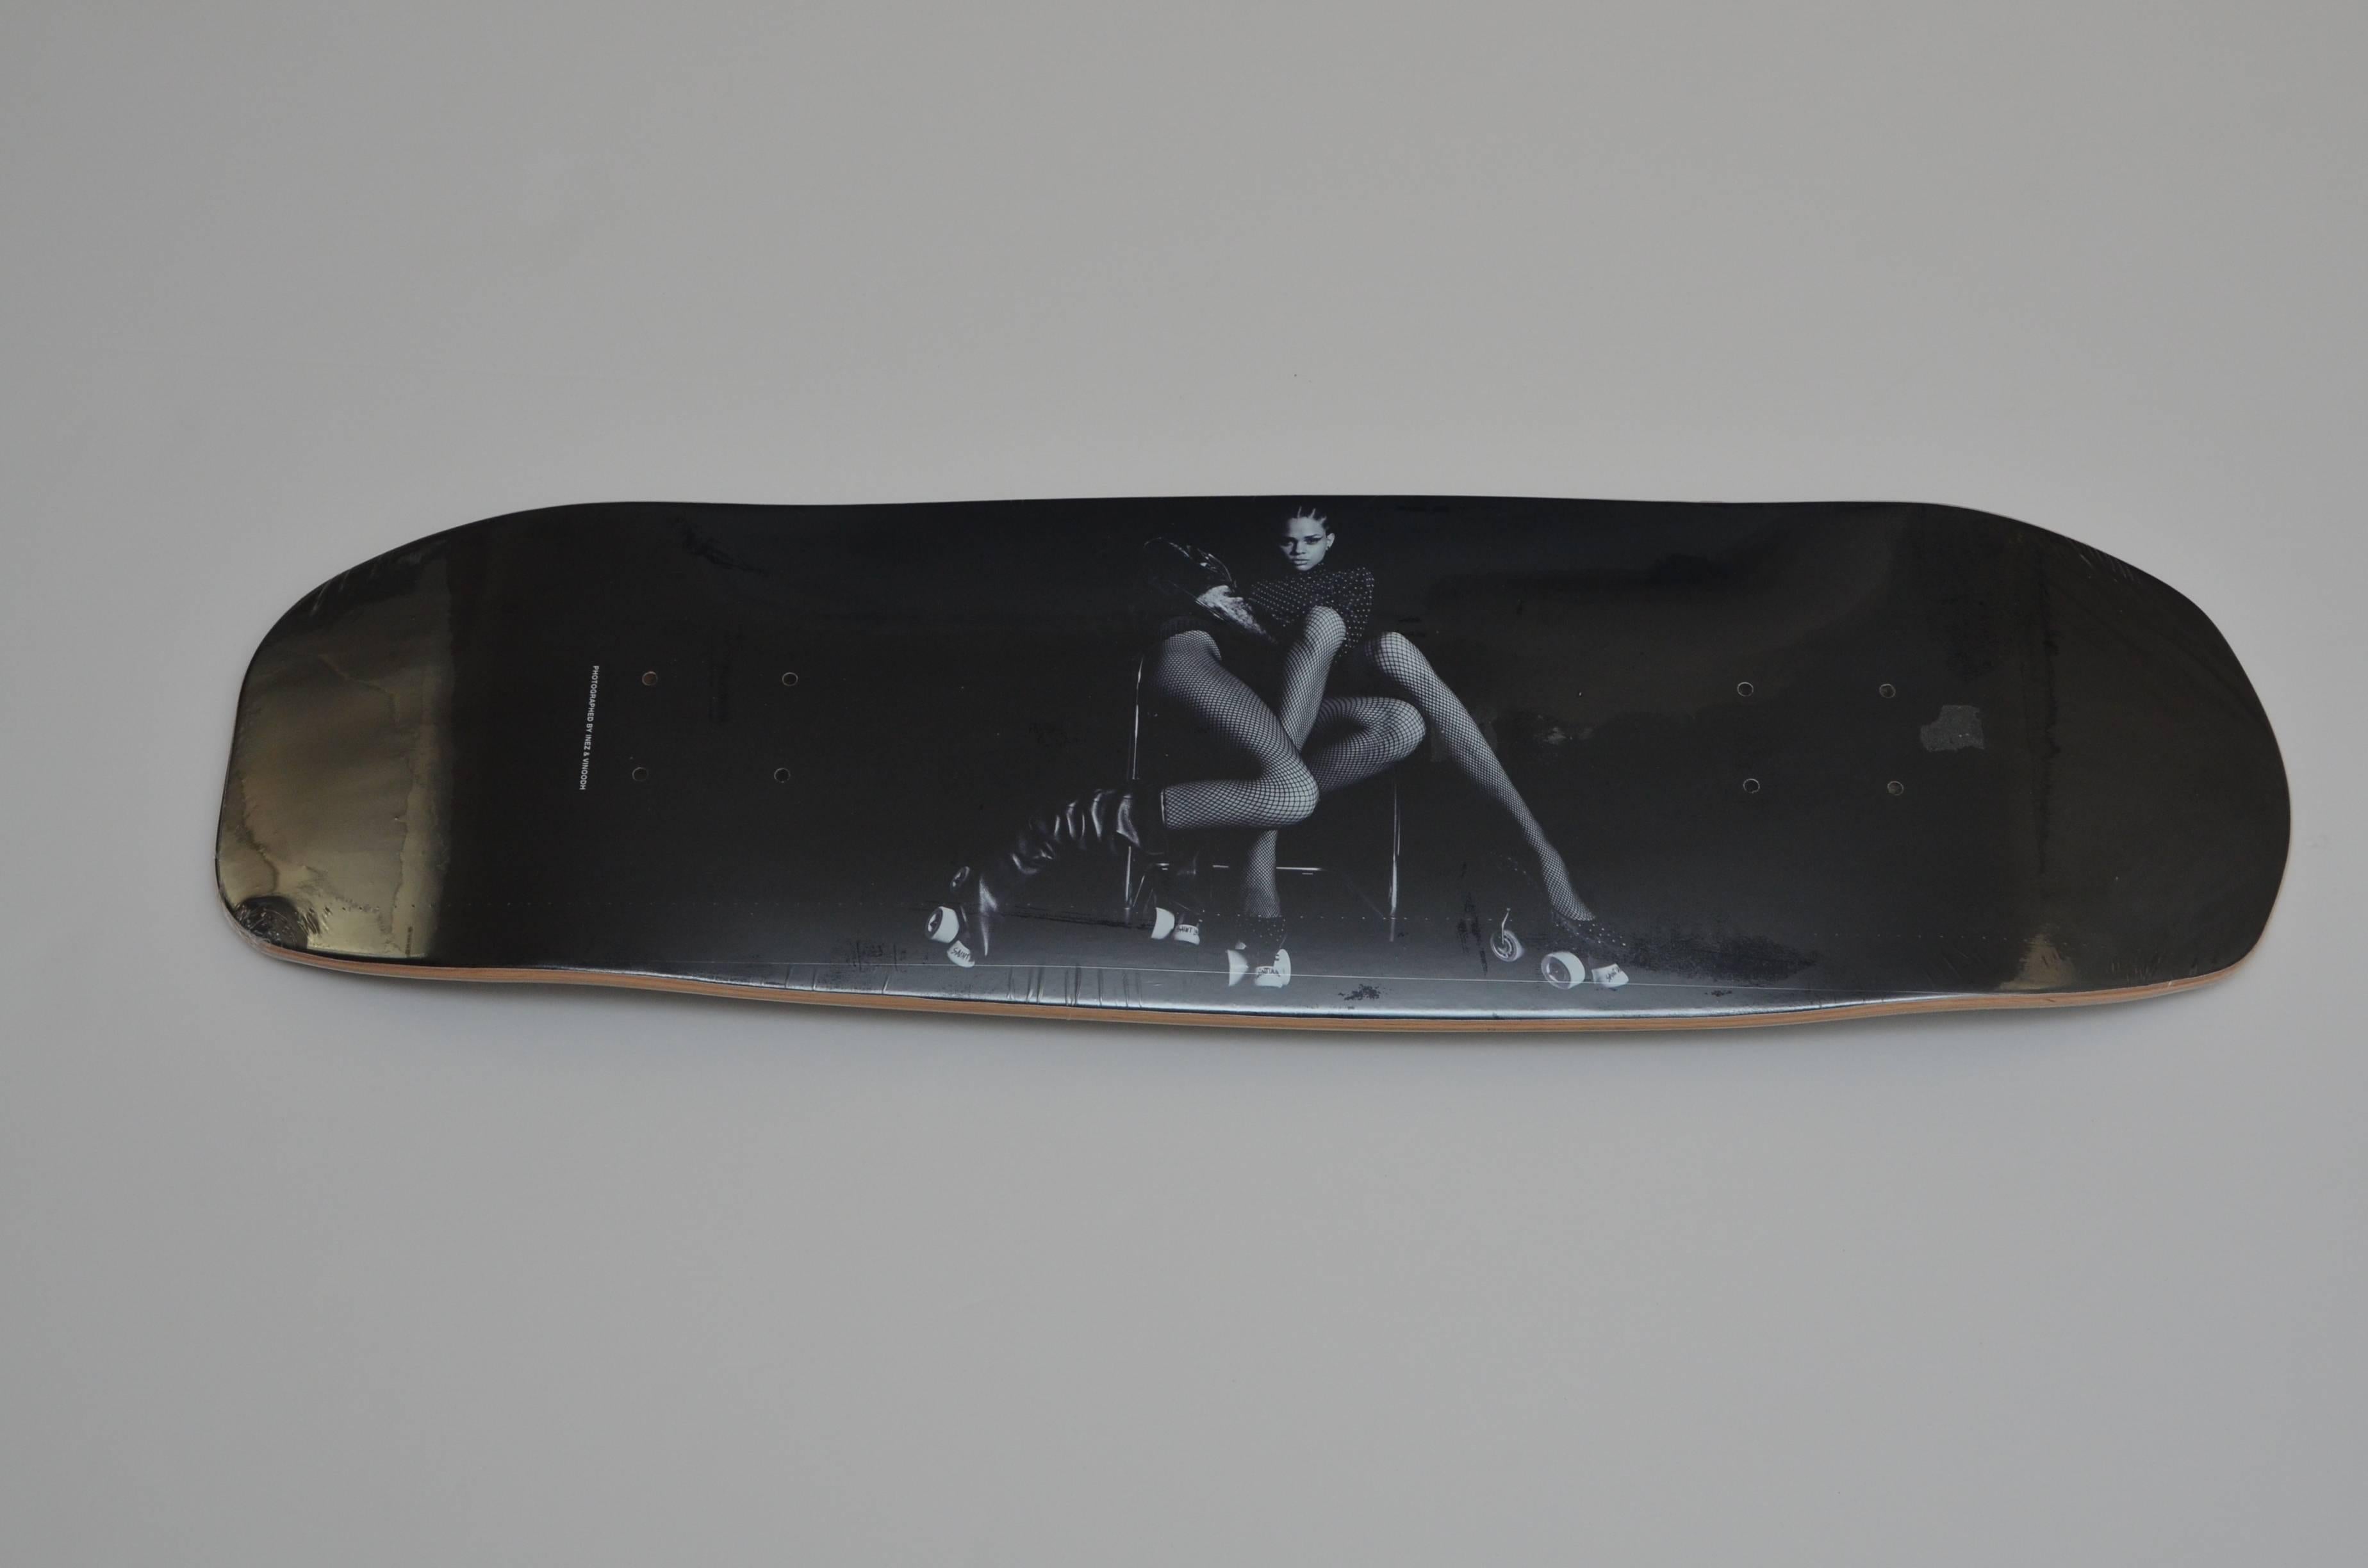 Saint Laurent X Colette collaboration skateboard .
Only 100 made.
This piece is from last collaboration Colette had before they closed door 
Dec 20th 2017 
Very collectible.
Since its a real skateboard it has holes and it could possibly be hanged on